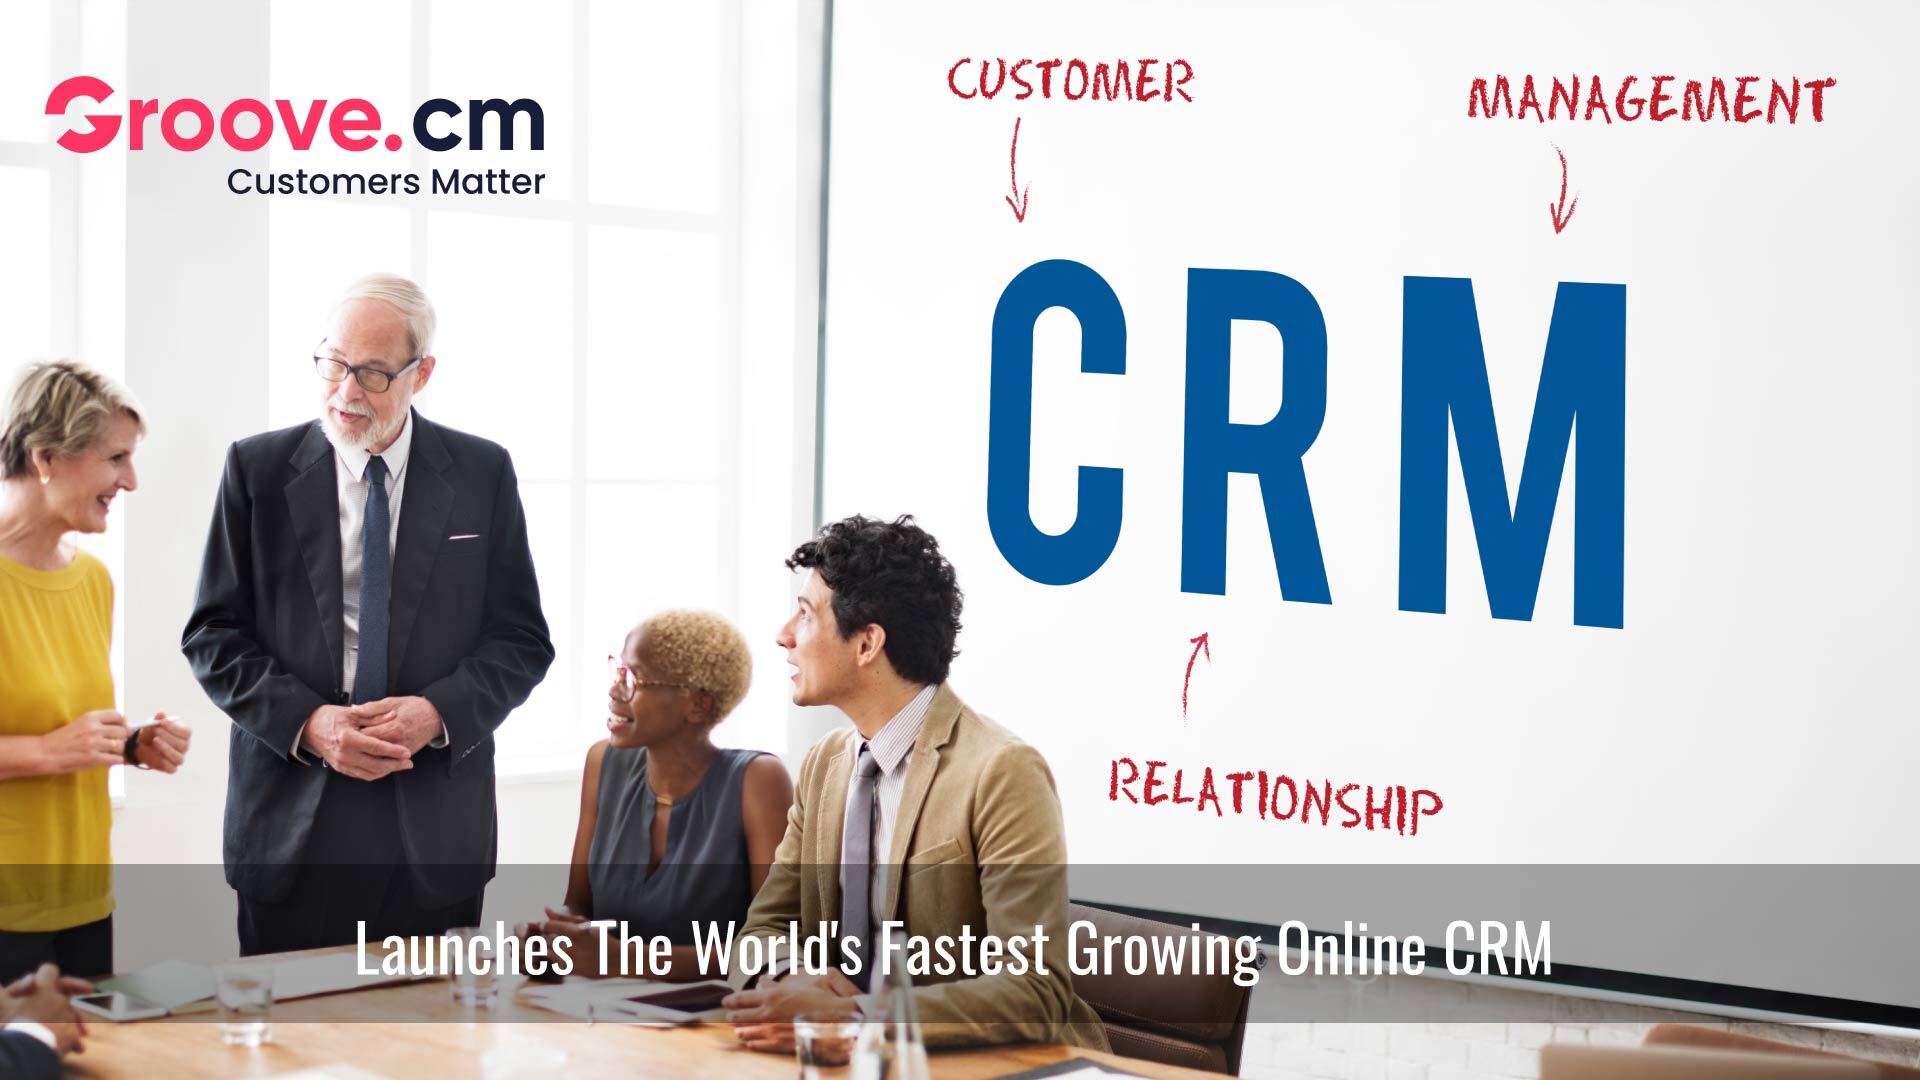 Groove.cm, The World's Fastest Growing Online CRM, Launches